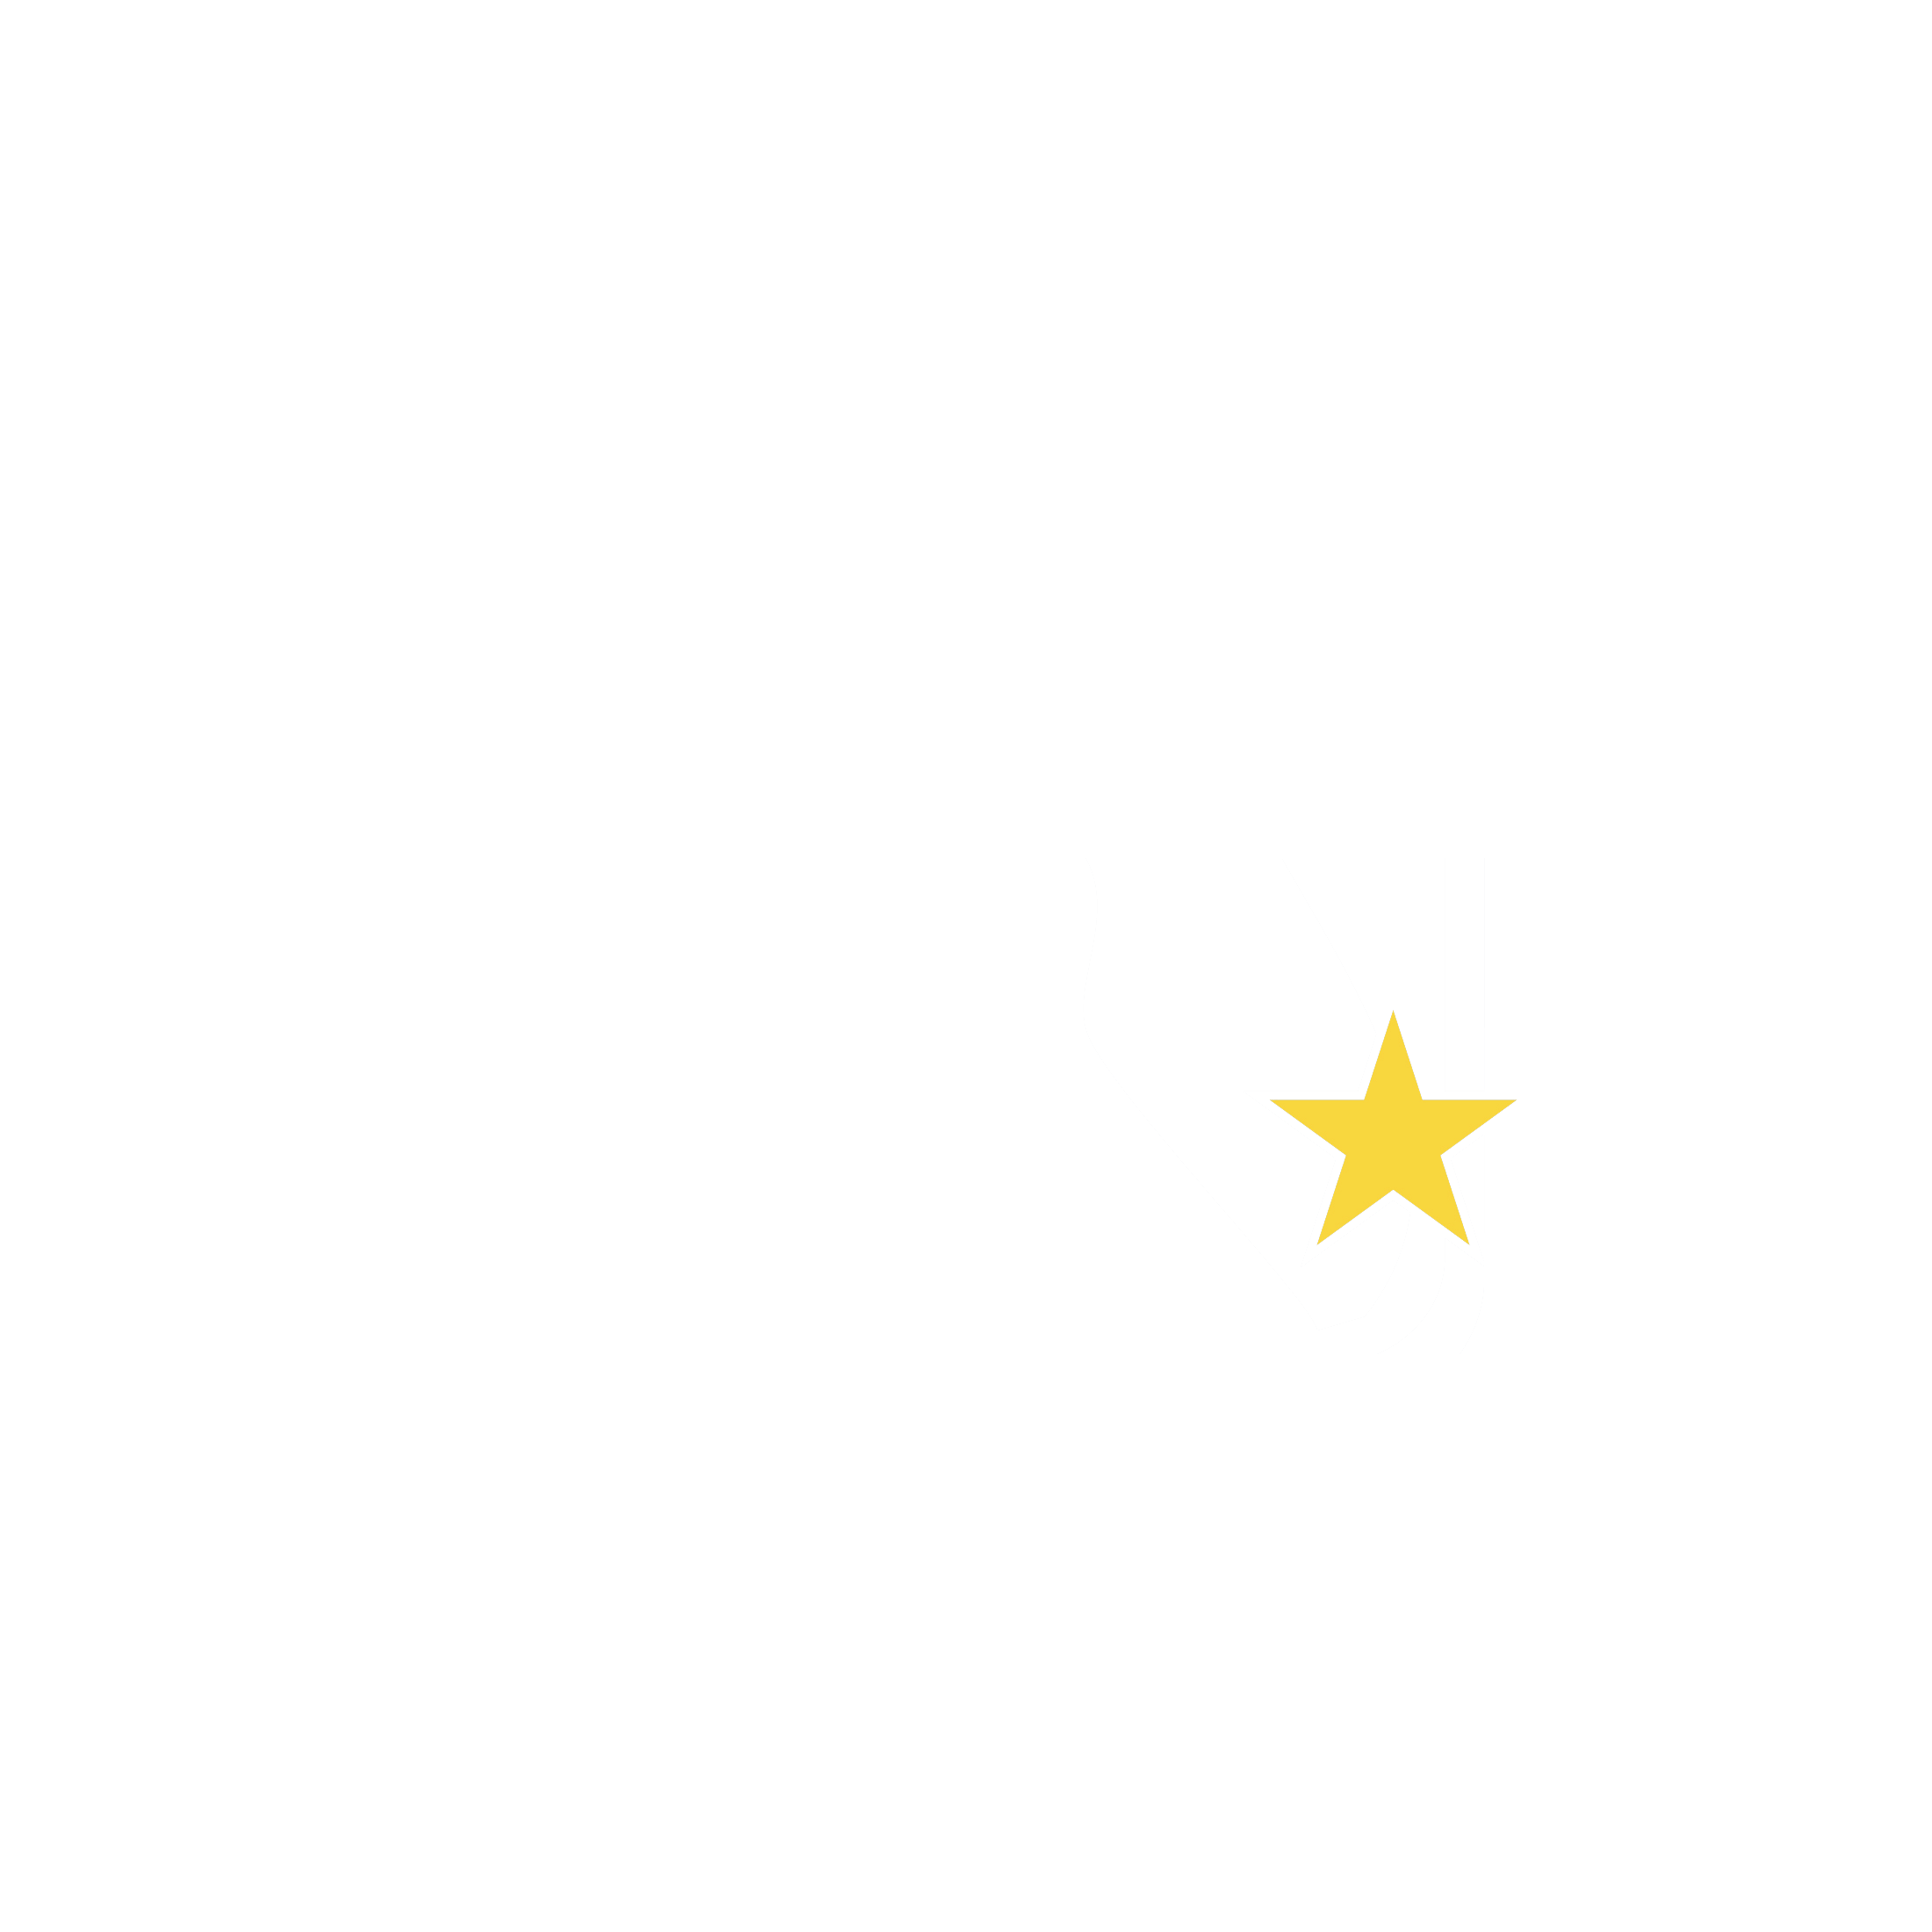 Palm Beach County League of Cities